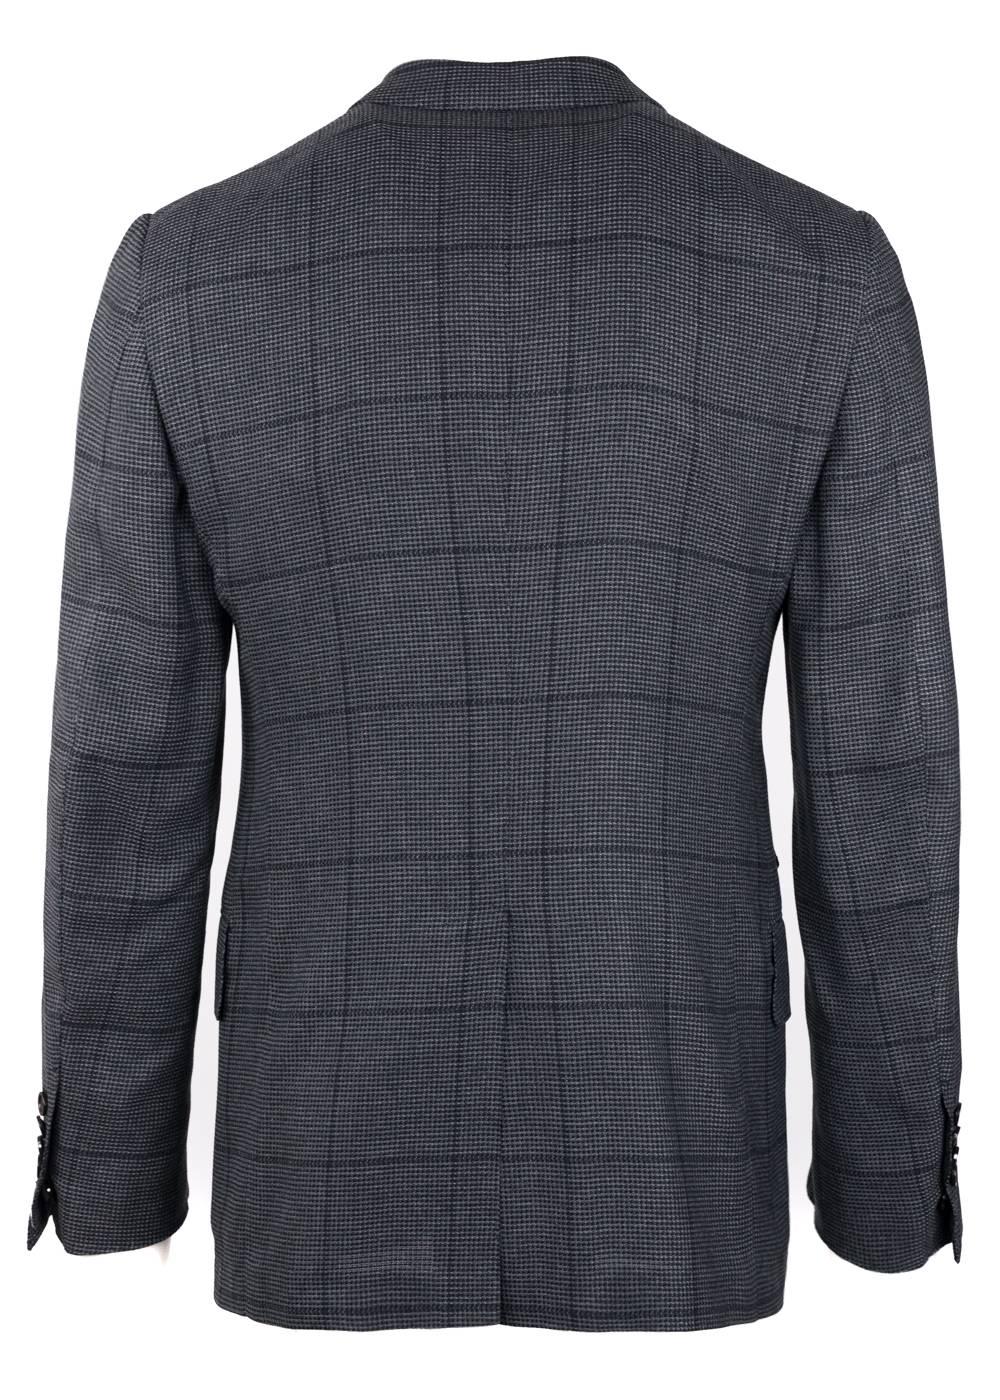 The signature Tom Ford Shelton Jacket updated in a 100% silk textile with a windowpane design. This constructed Shelton base jacket is finished with notch lapels with flap pockets in a two button silhouette. The jacket has a windowpane pattern to